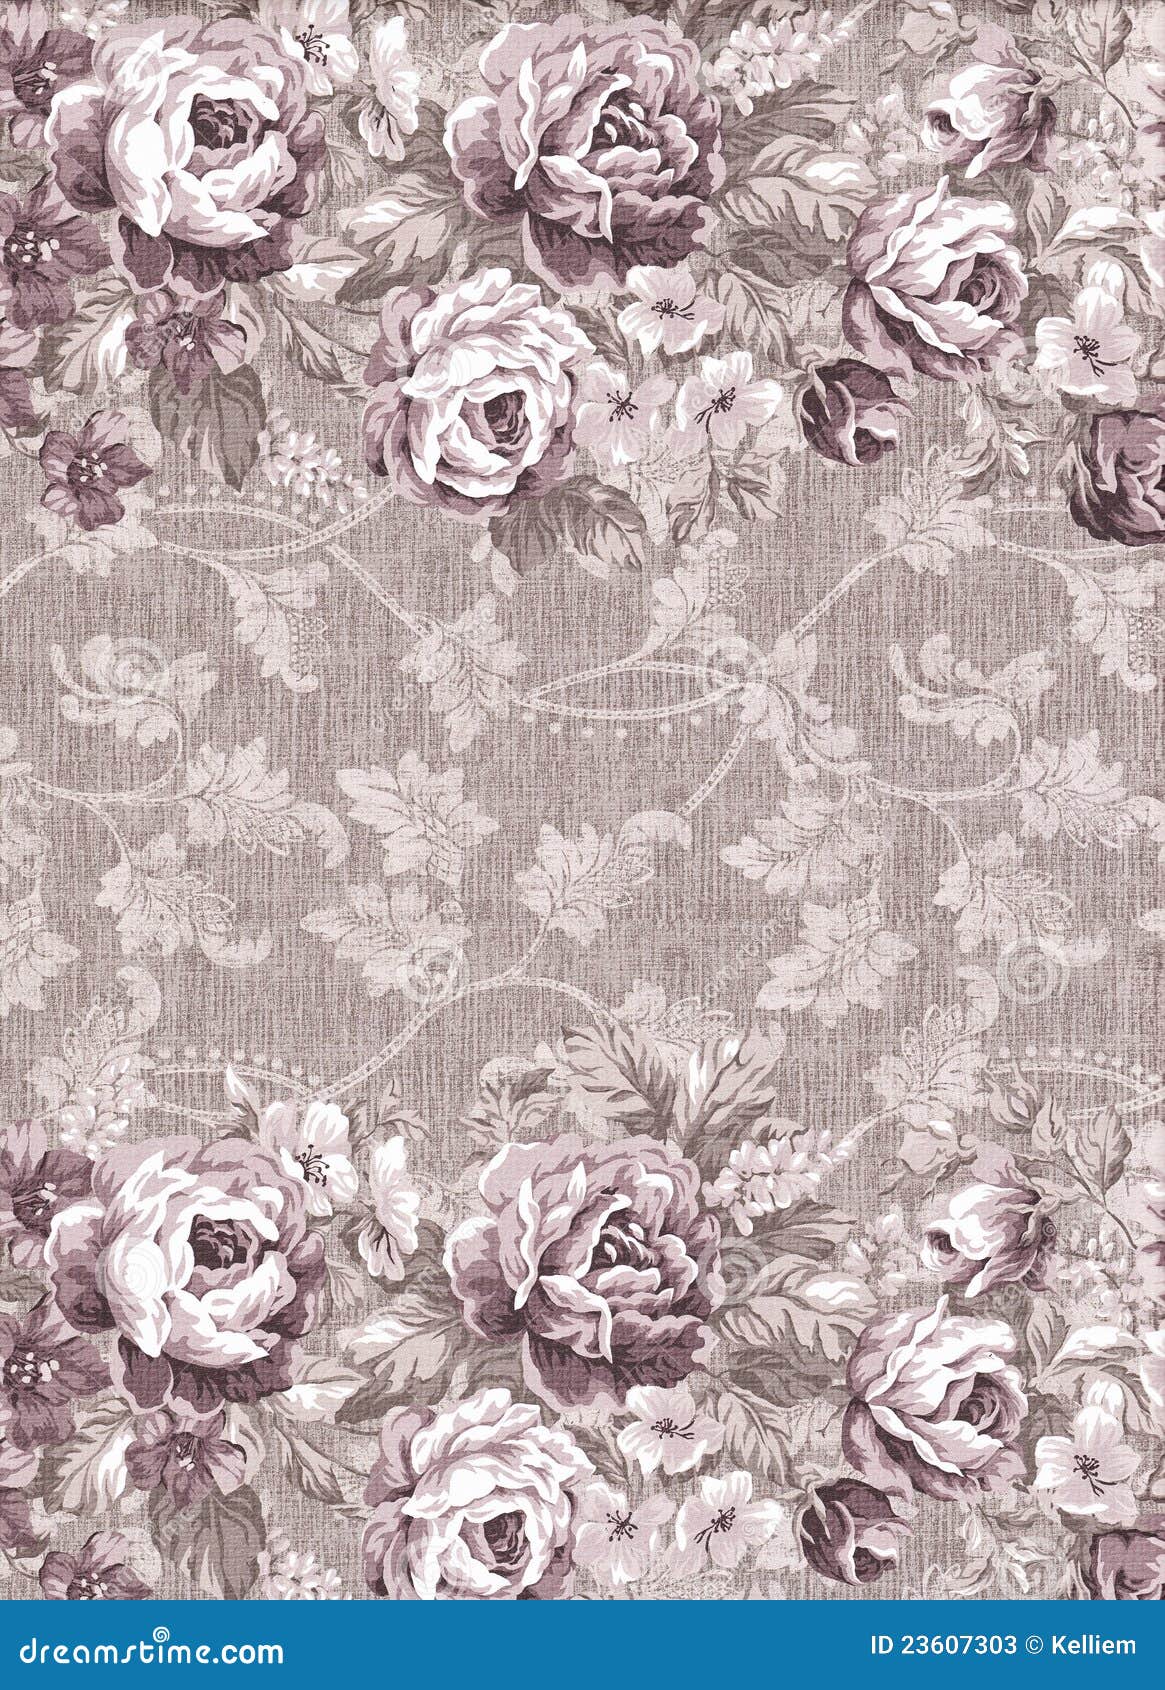 faded floral pattern